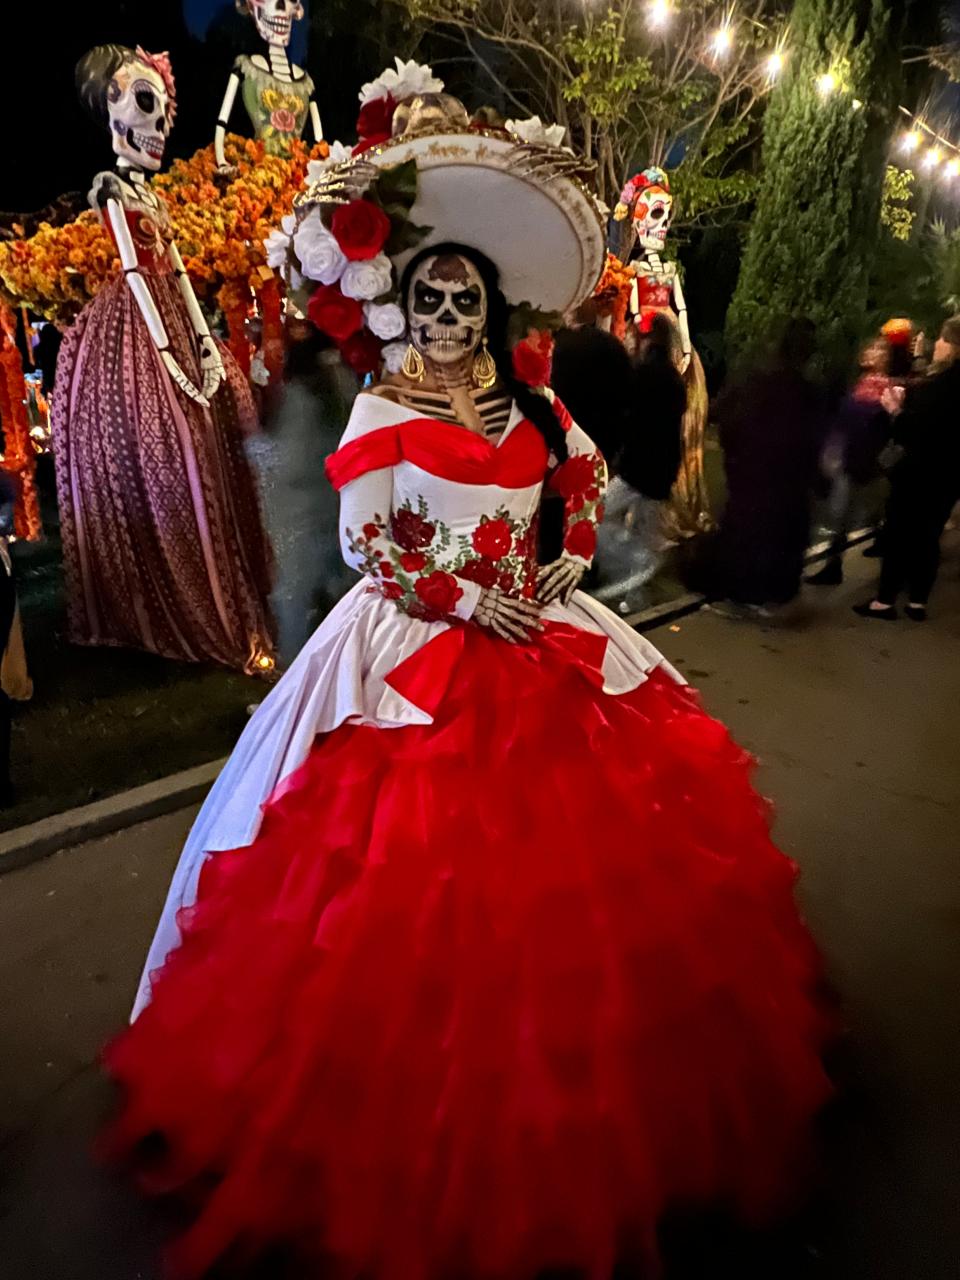 An elaborate "La Catrina" costume wowed during the Día de Los Muertos celebration at the Hollywood Forever Cemetery in Los Angeles on Saturday, Oct. 28, 2023.